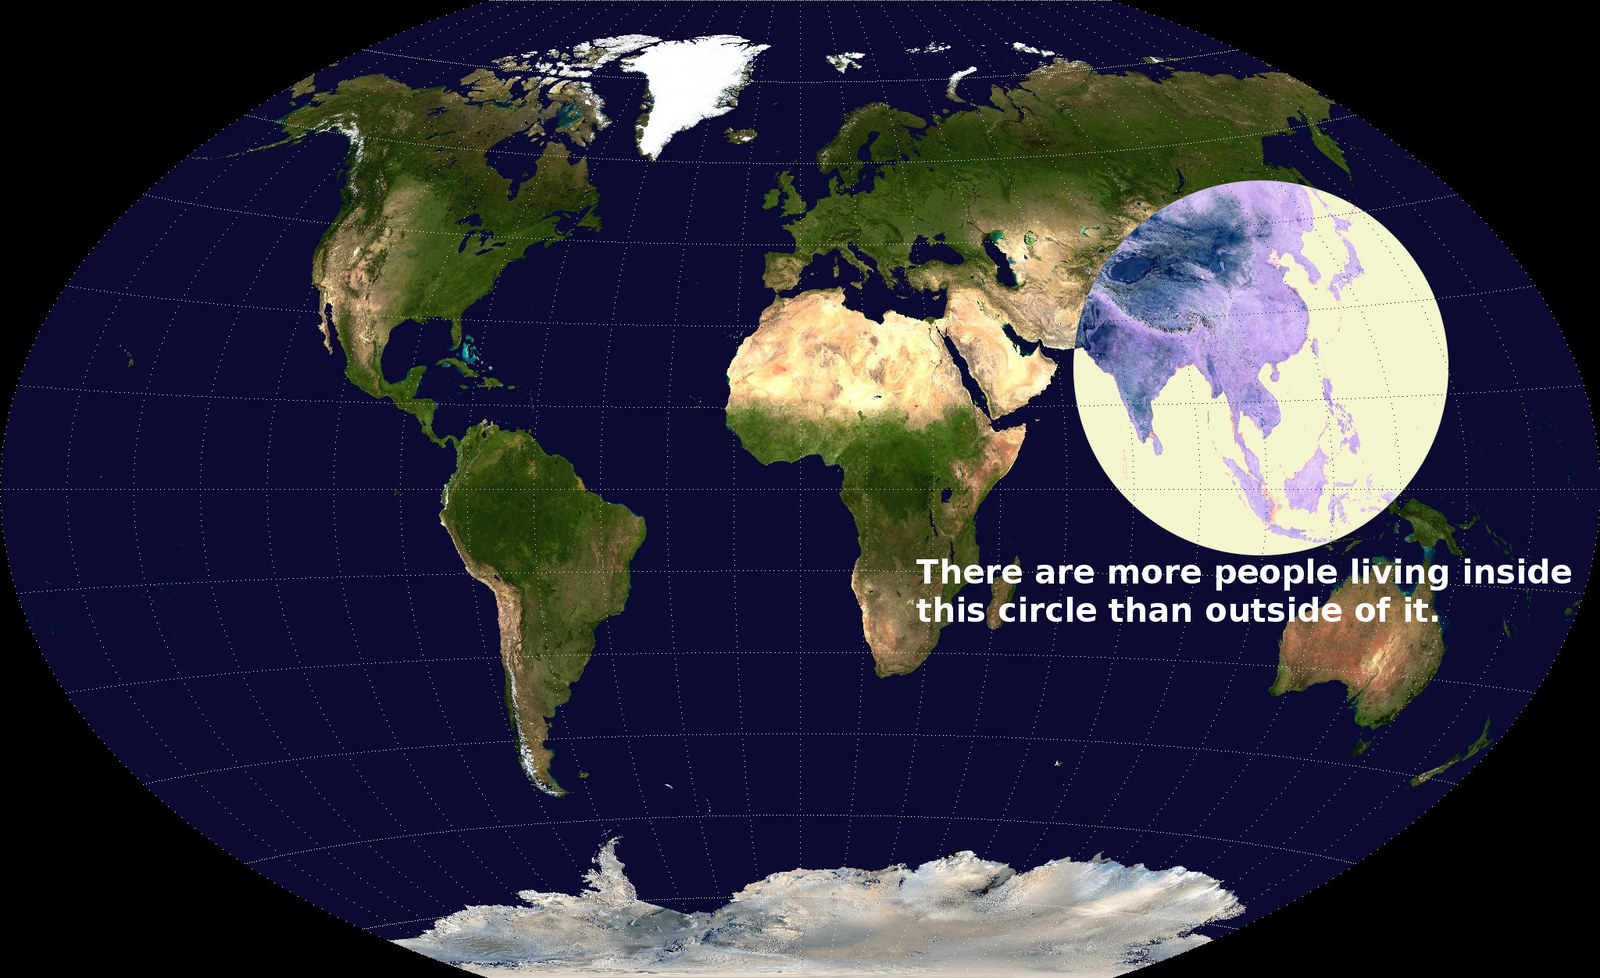 6. To put that in perspective, there are more people living within this circle than outside of it: